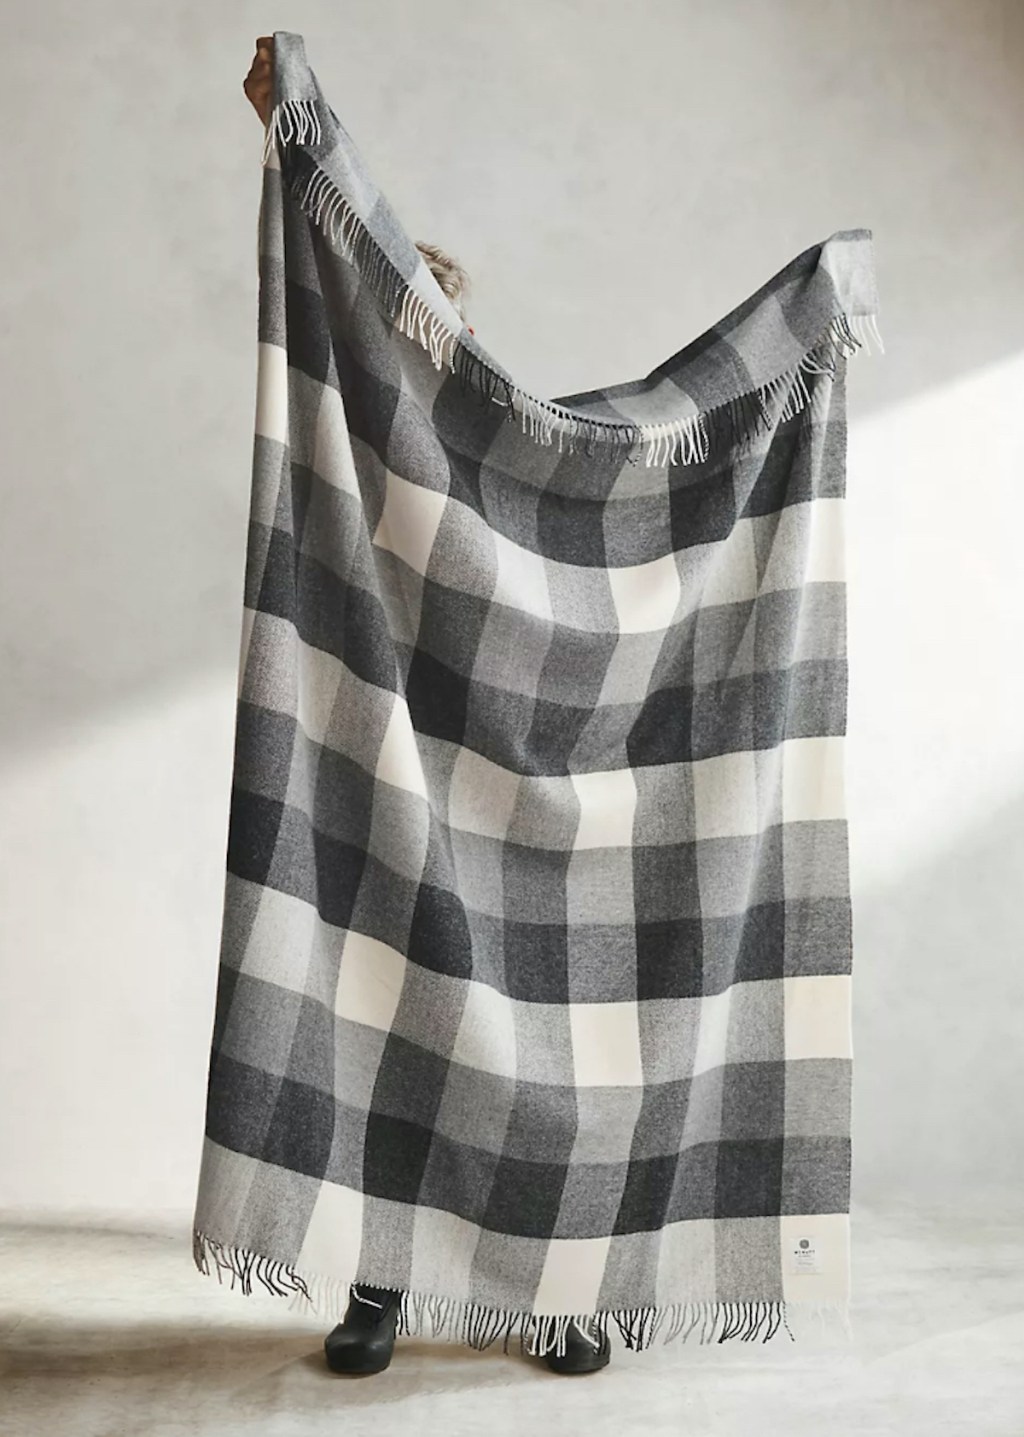 person holding up black gray and cream buffalo plaid check blanket